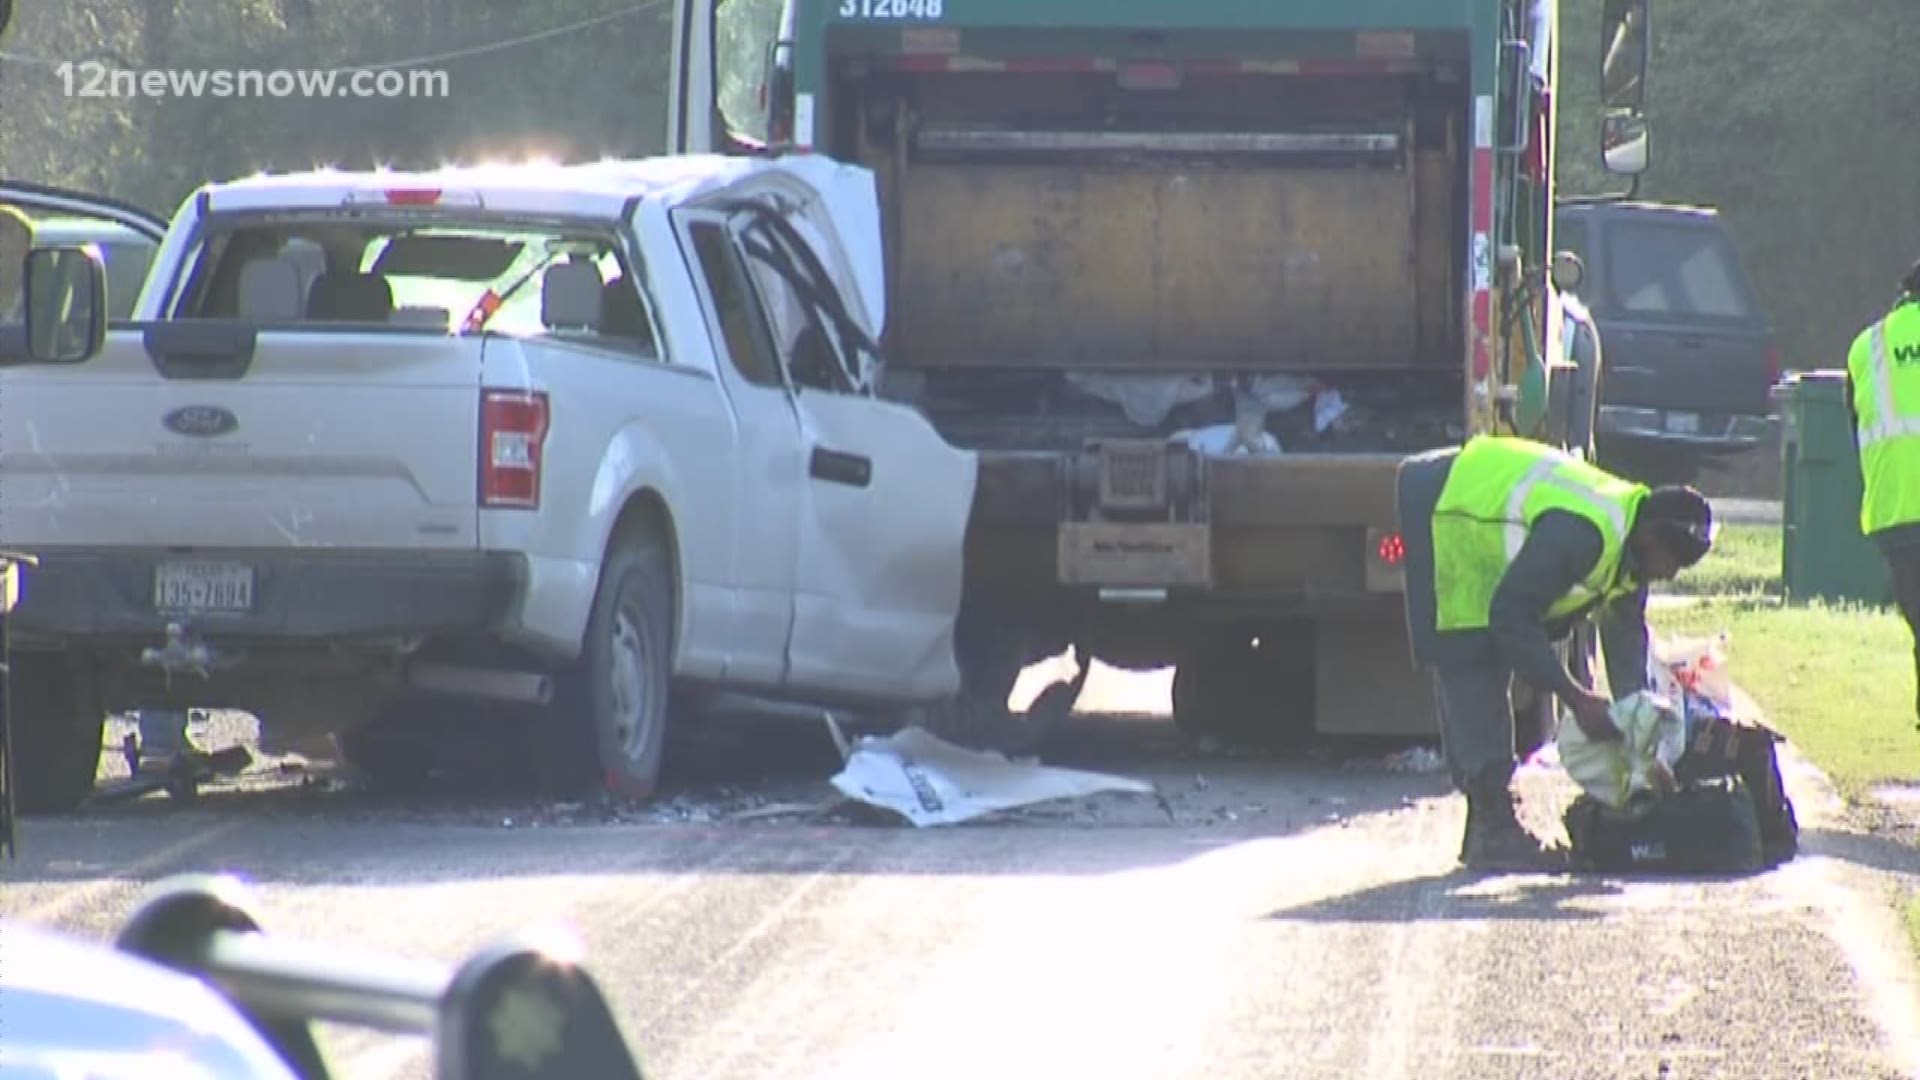 One of the workers was injured by flying debris after he jumped clear of the vehicles.